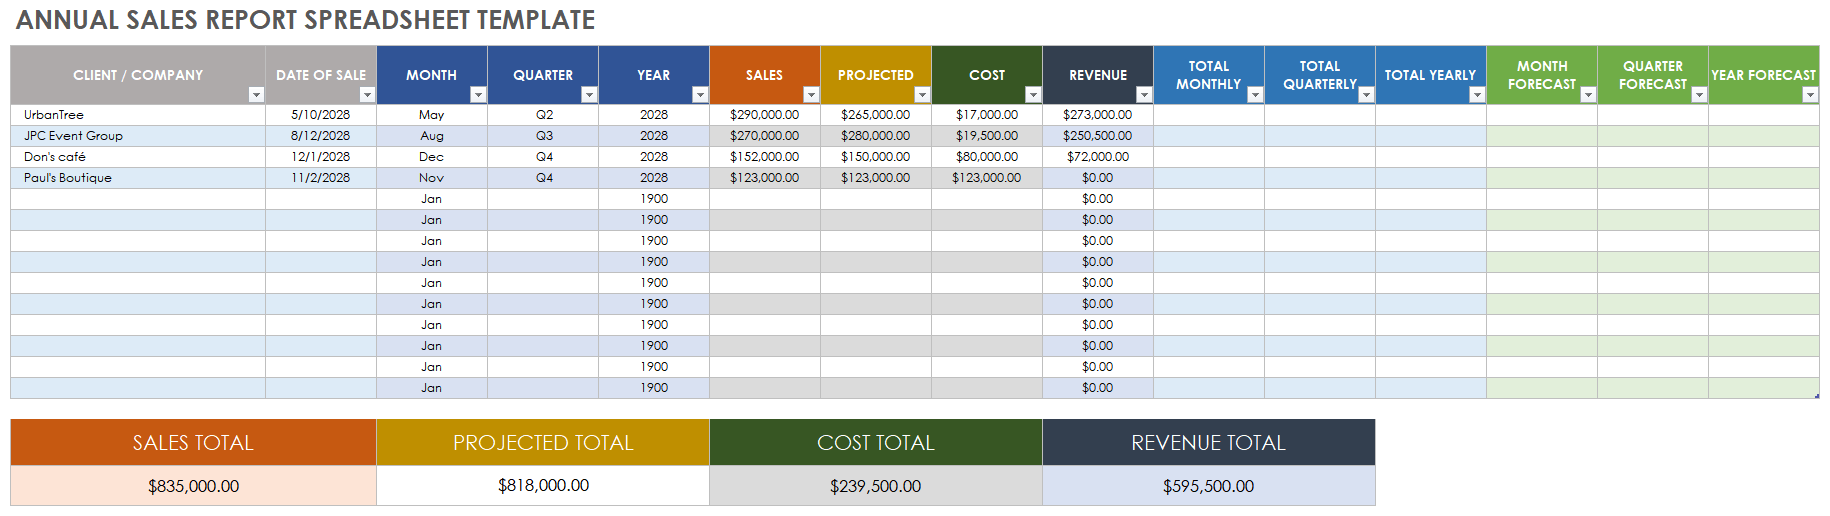 Annual Sales Report Spreadsheet Template